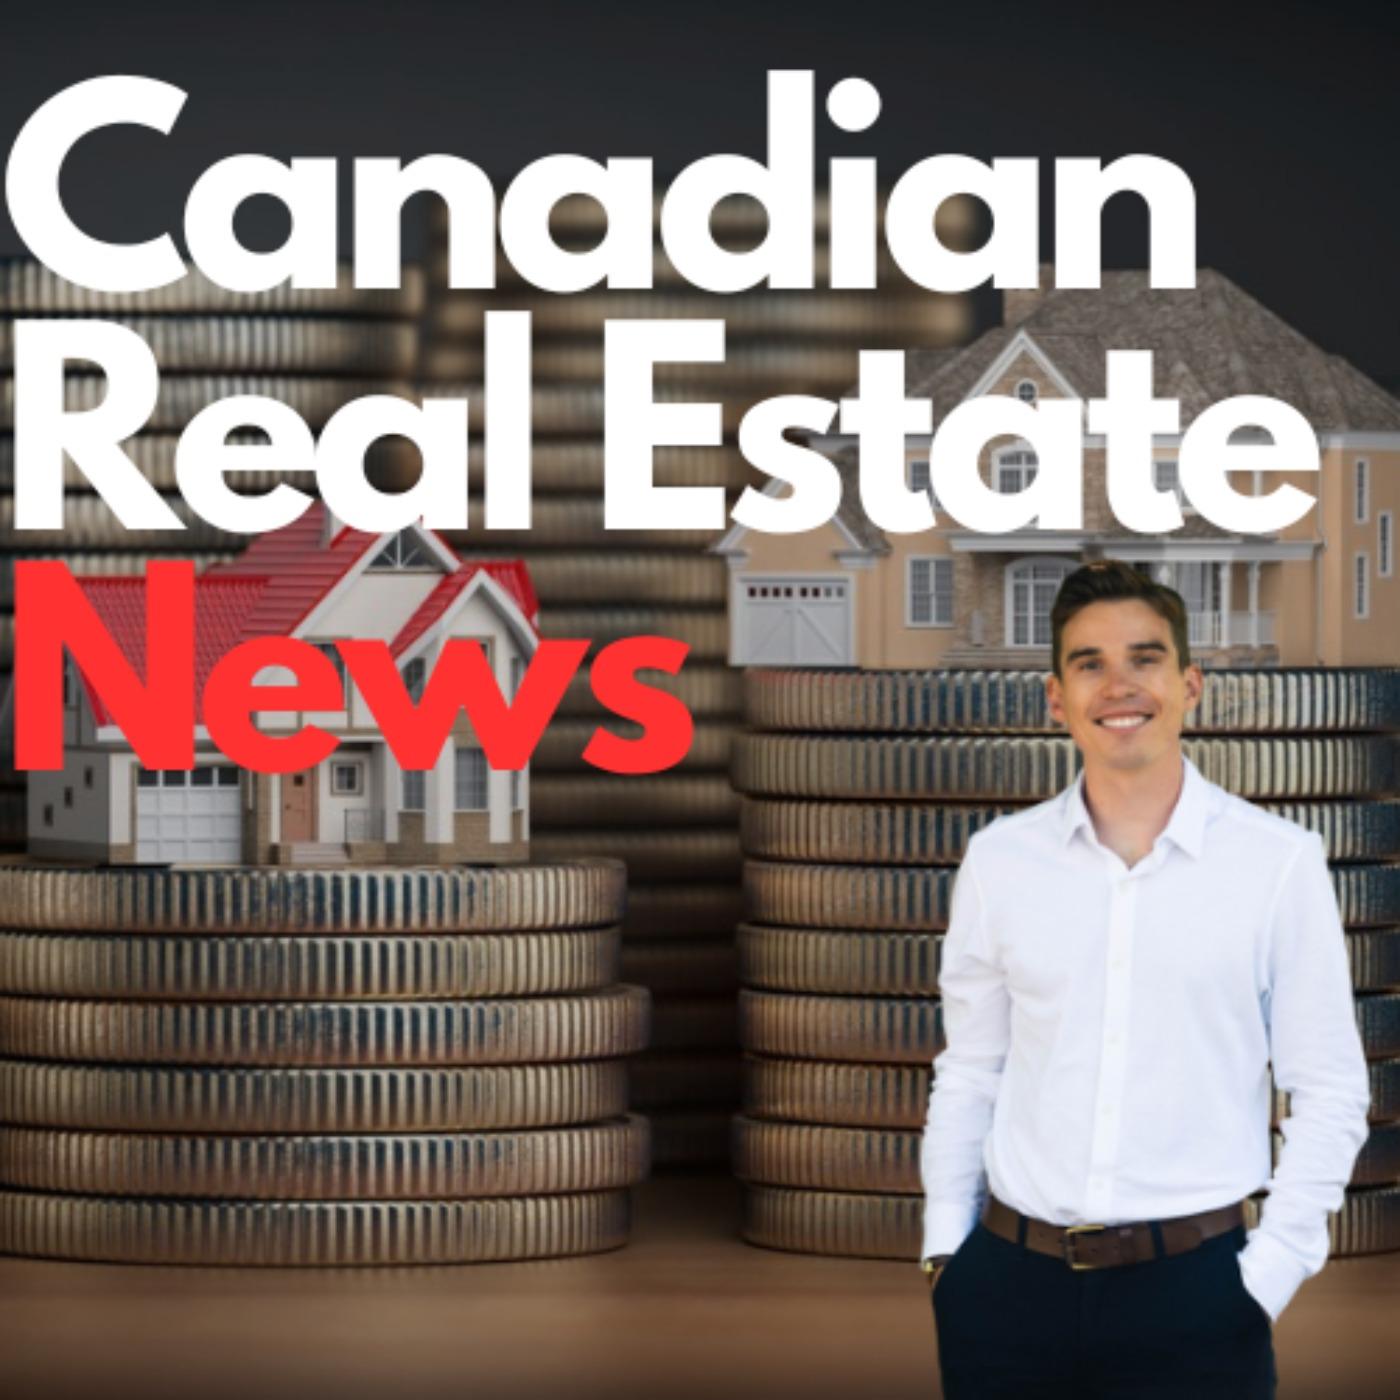 The Canadian Real Estate News Podcast